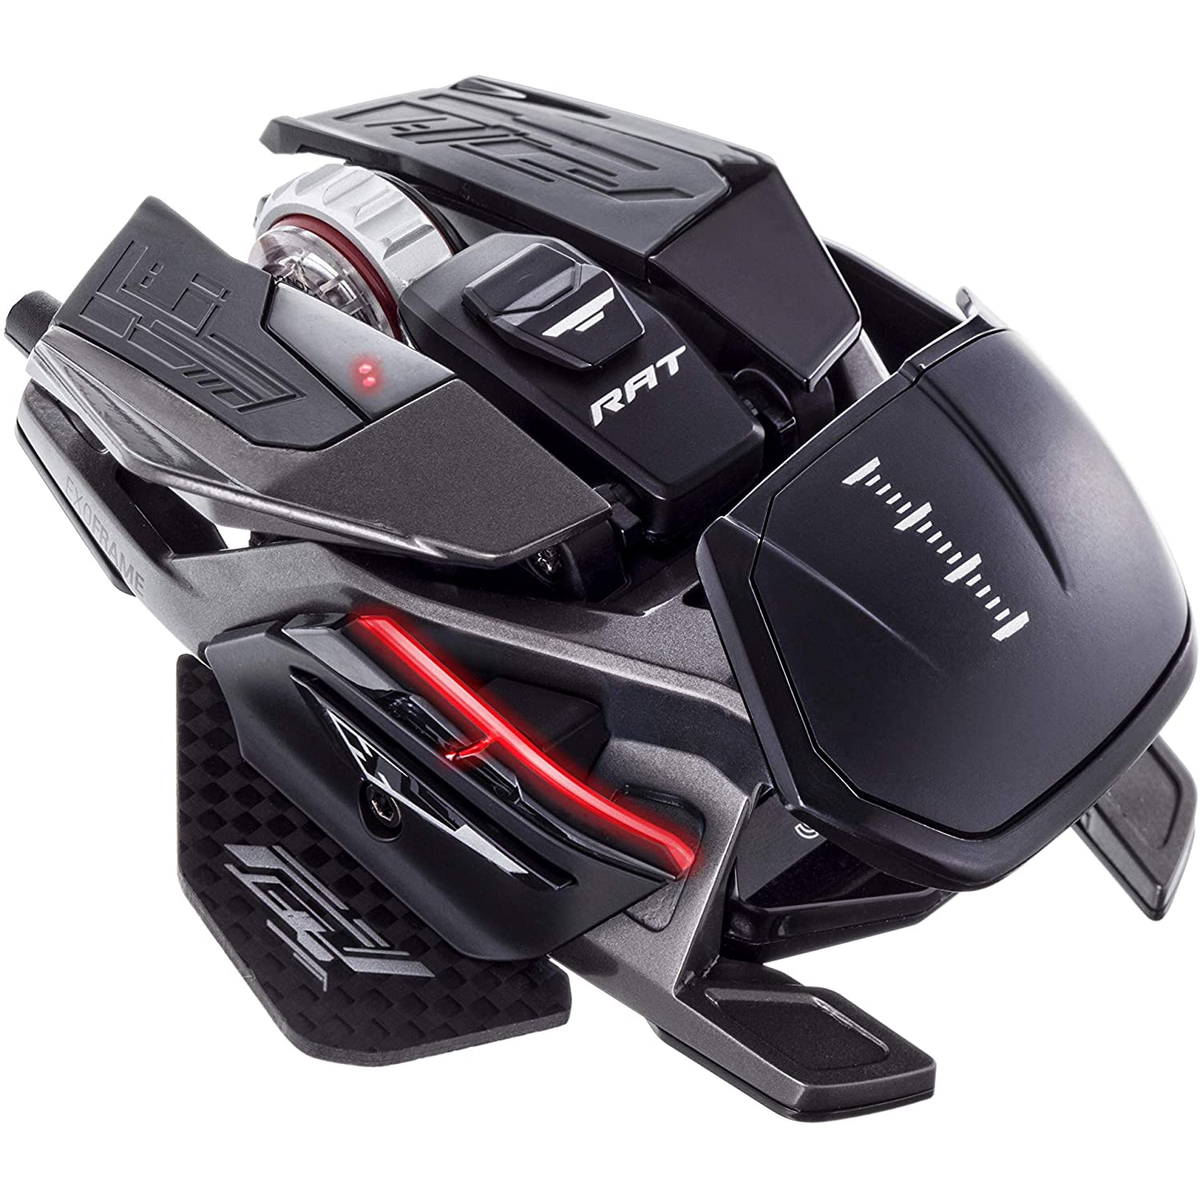 HIGH MR05DCINBL001-0 PERFORMANCE MOUSE black CATZ GAM. MAD Gaming BL Maus, X3